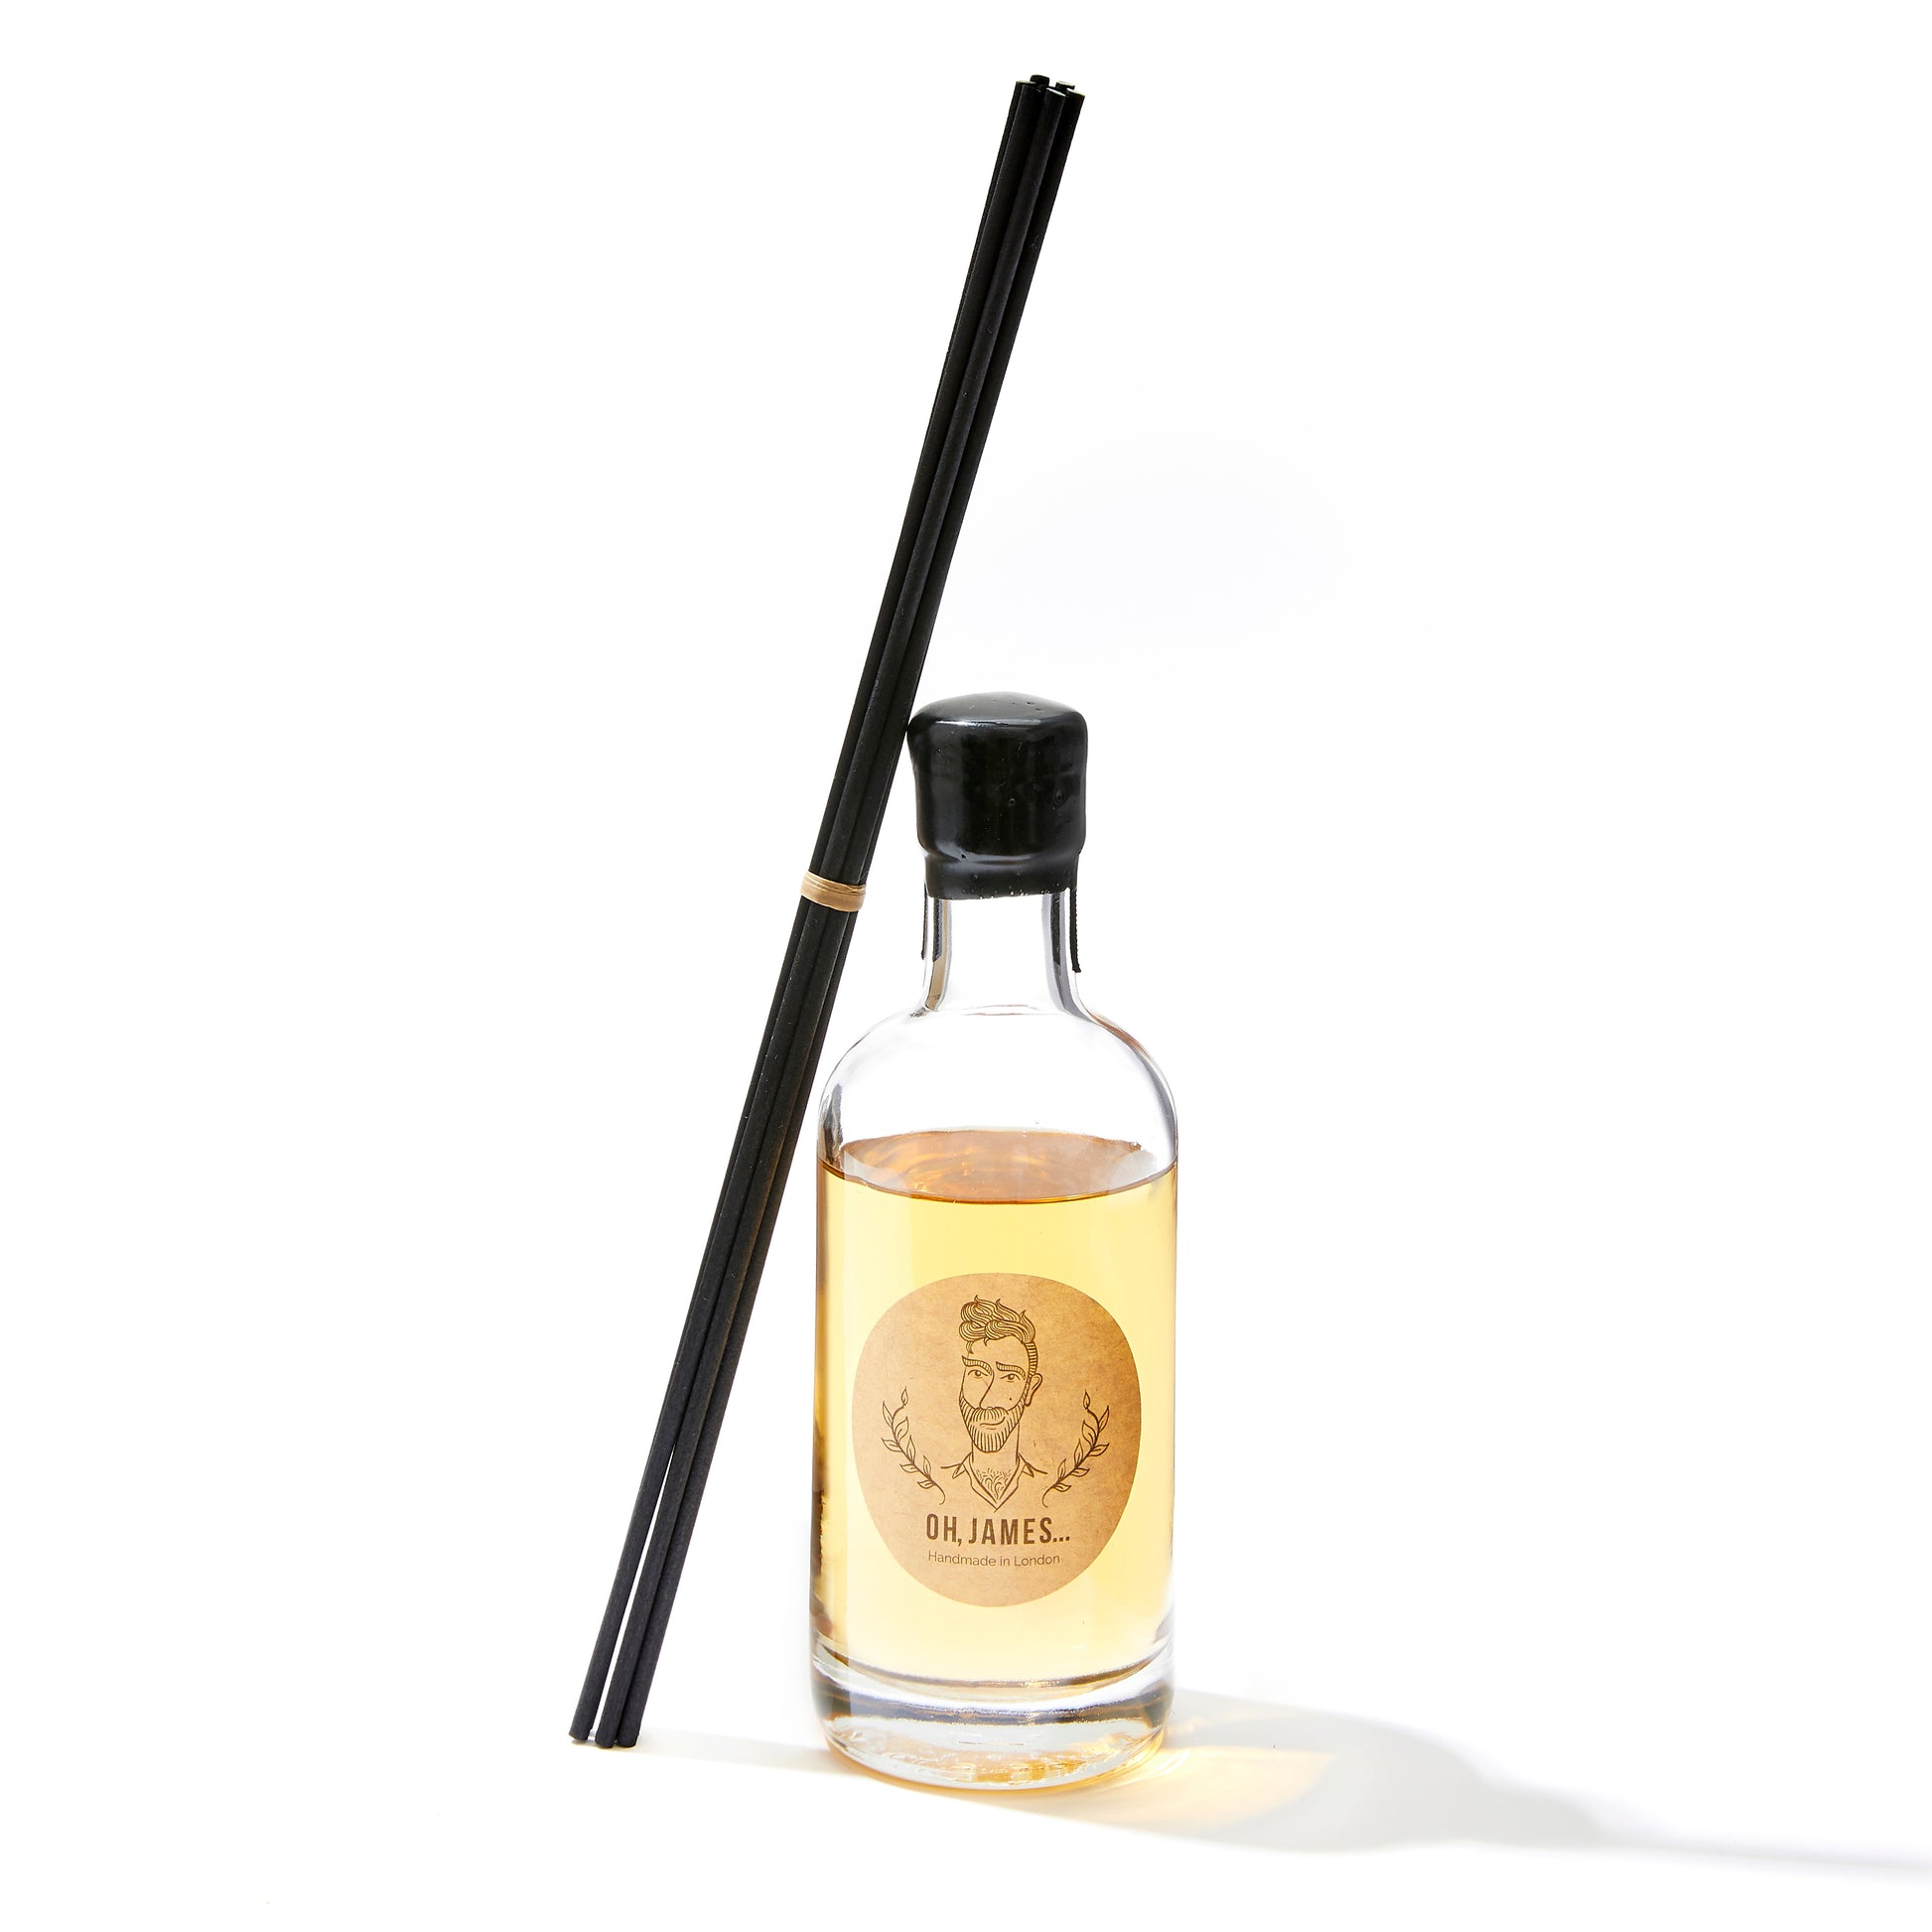 Oh, James... Reed Diffusers - OH, JAMES...